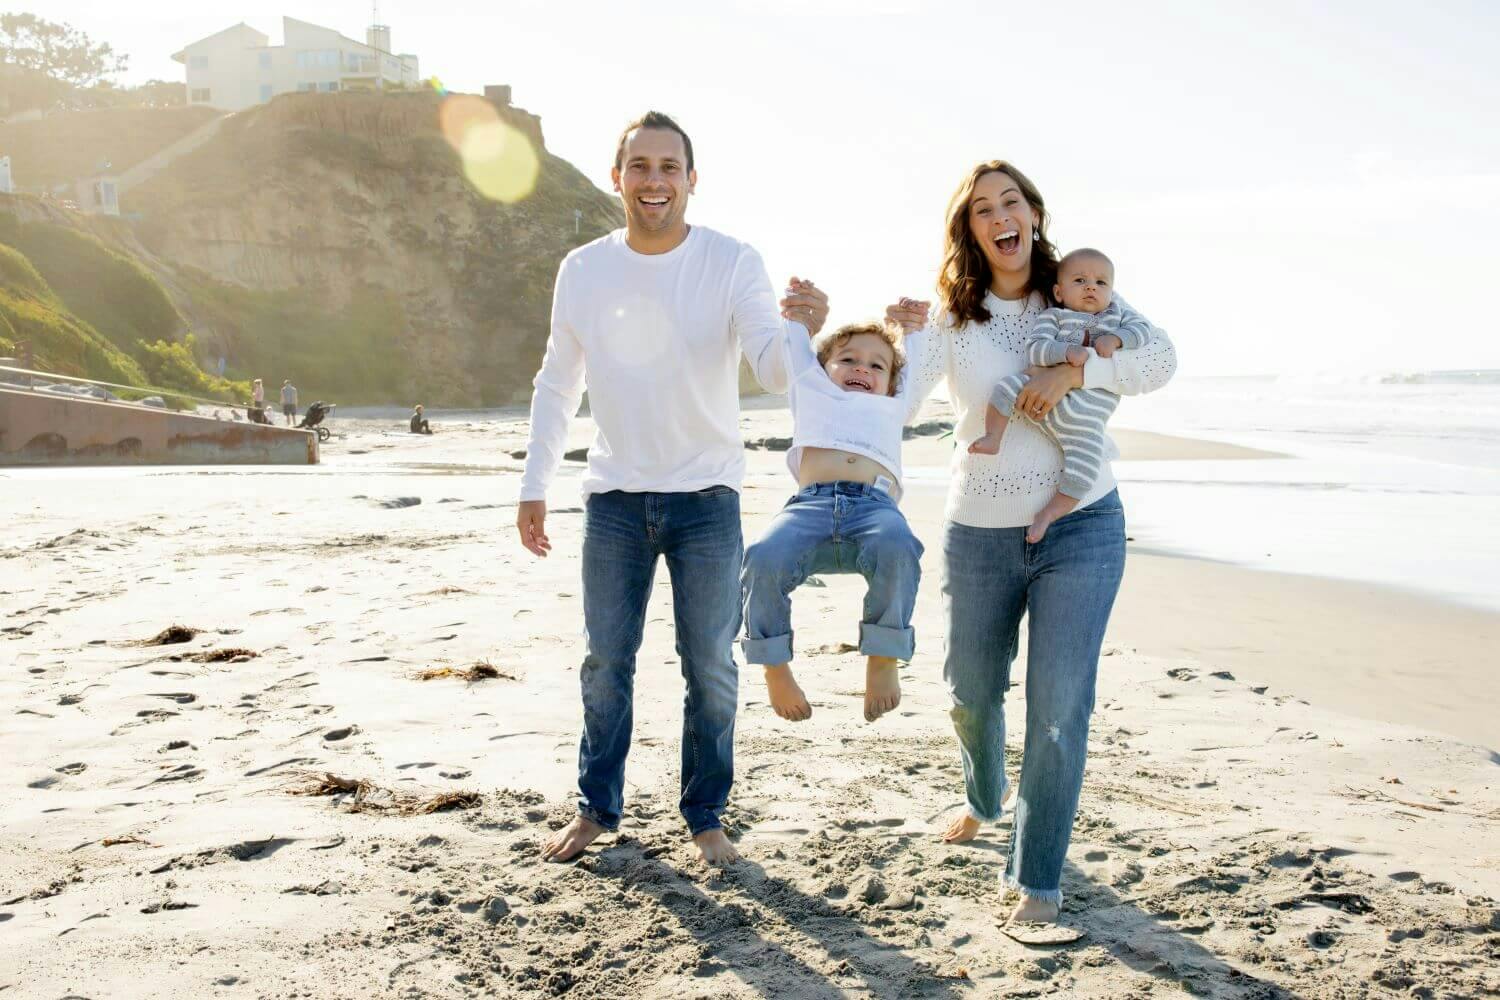 A family of four laughing and walking on the beach, with one child being held in the air.